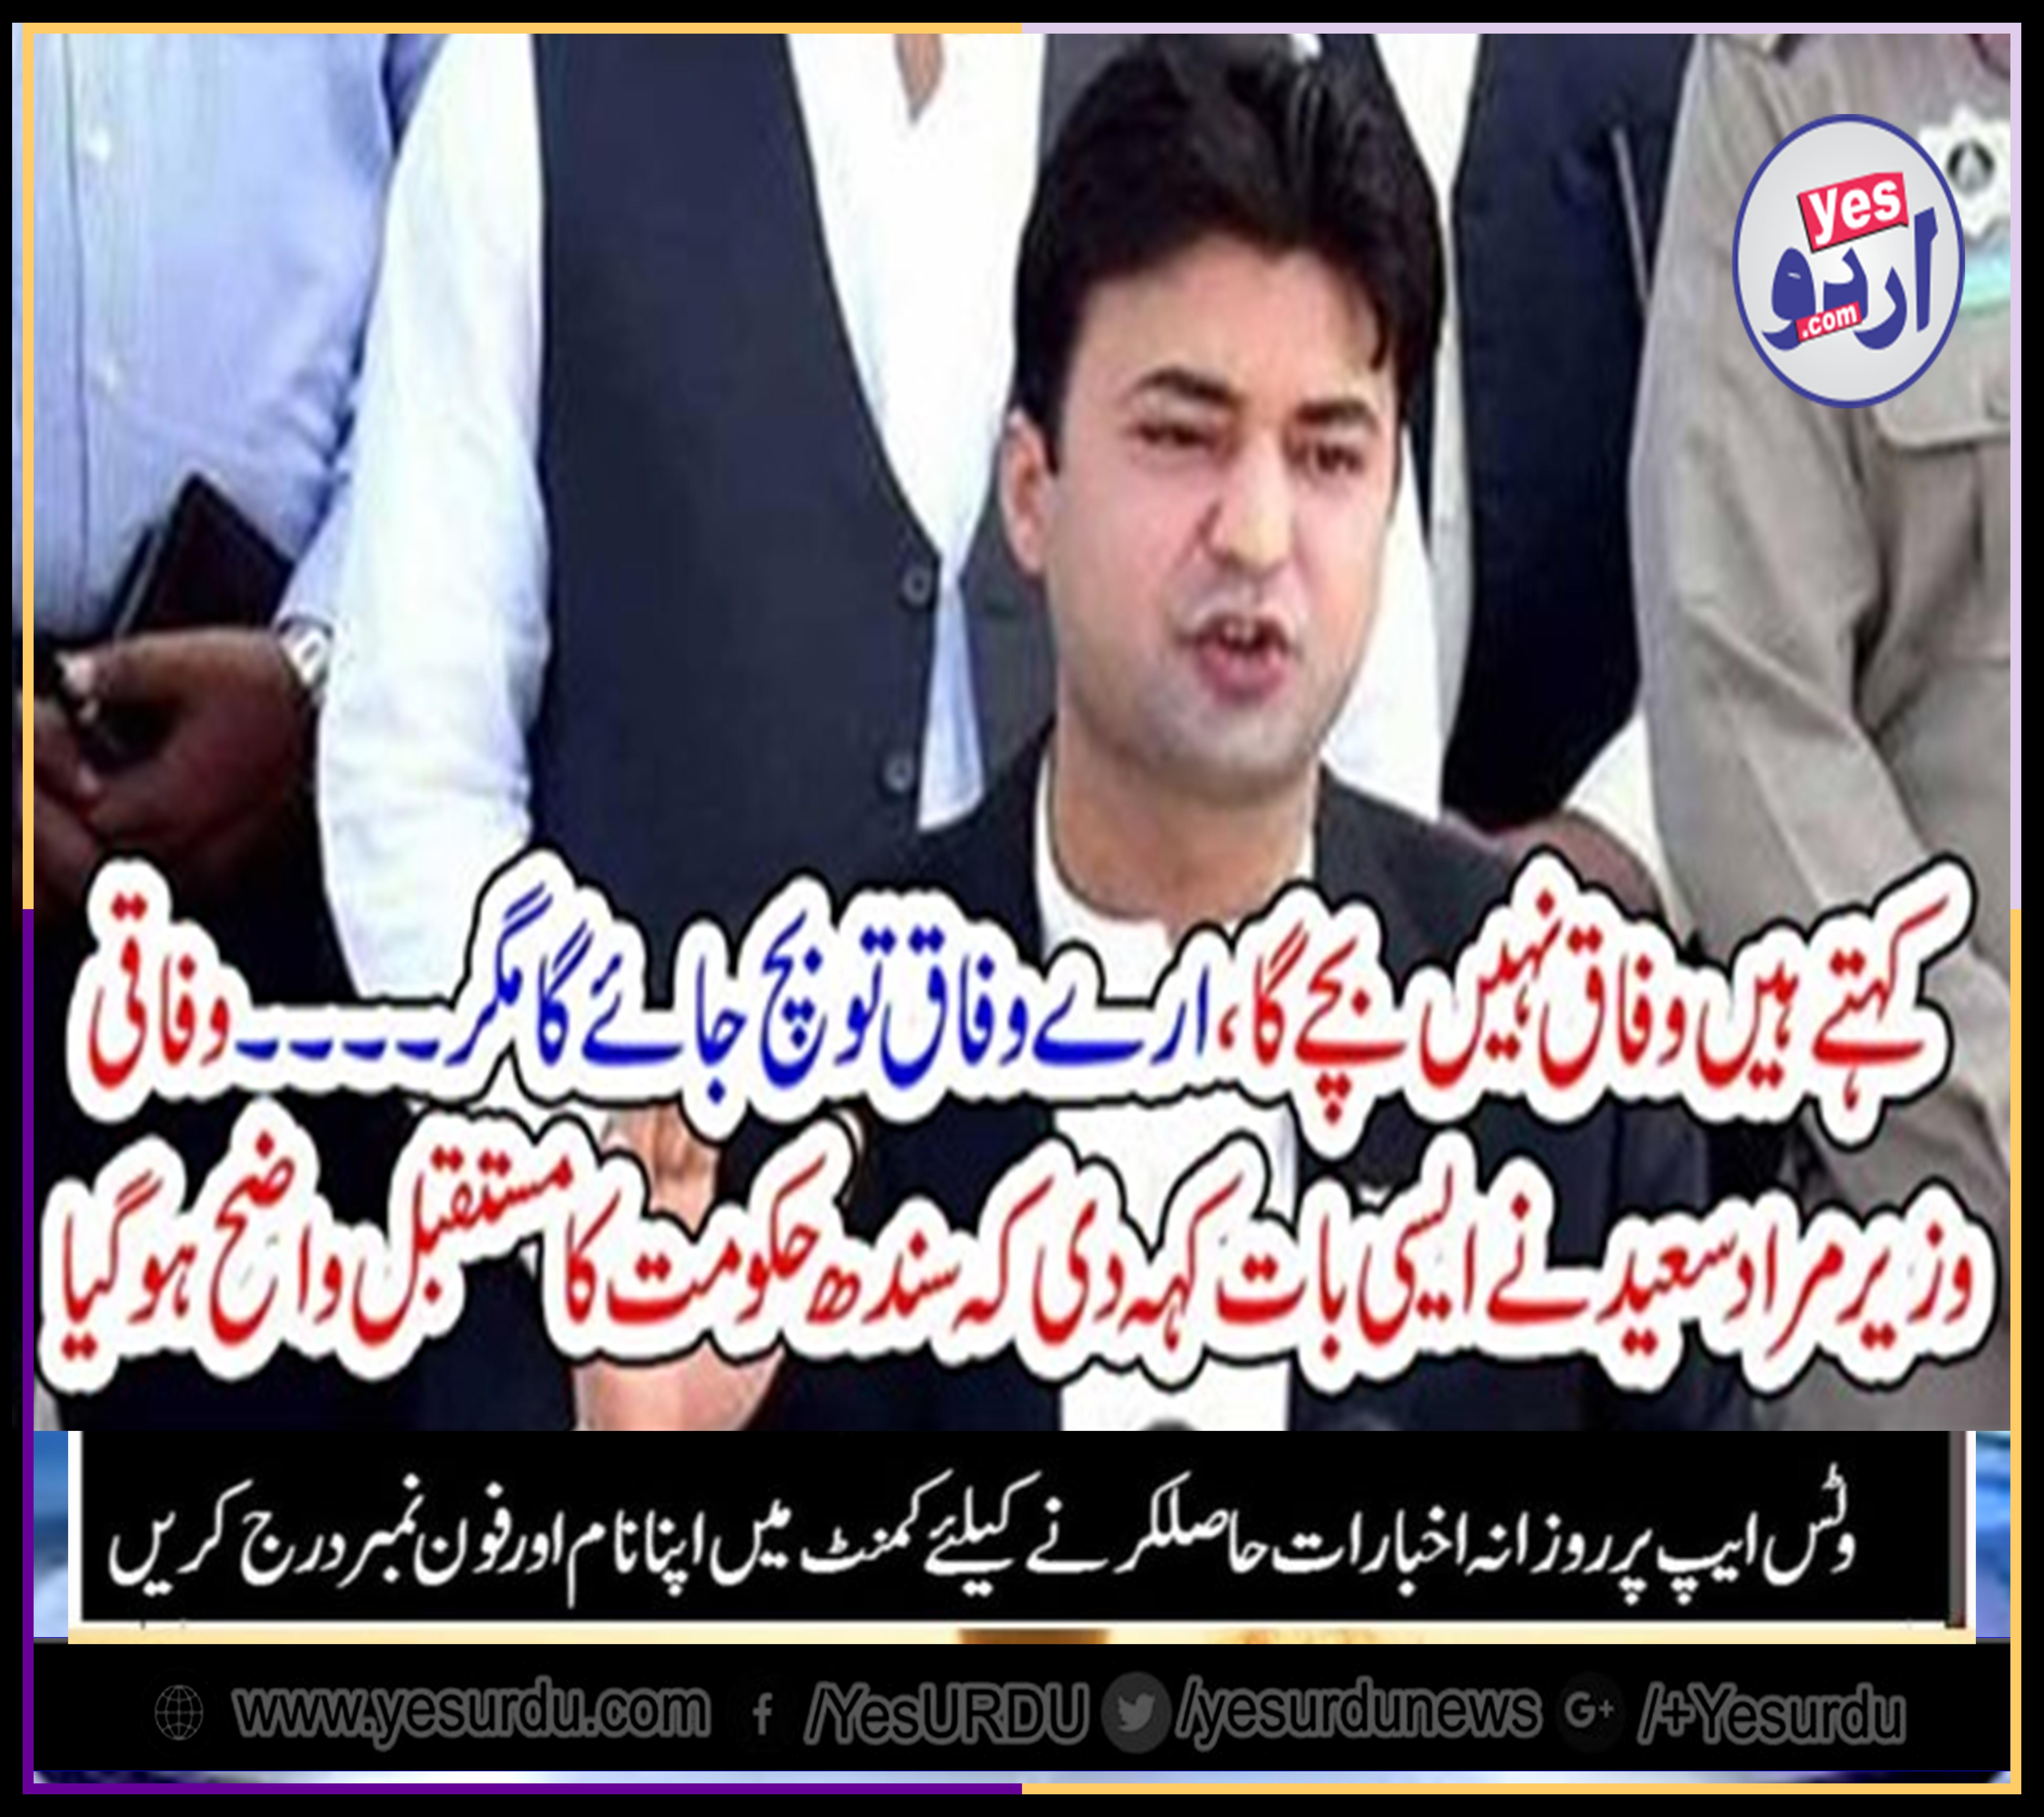 THEY, SAID, FEDERAL, WILL, NOT, STAND, IN, PAKISTAN, I, SAYD, FEDERAL, GOVT, WILL, STAND, BUT, THEY, ARE, UNABLE, TO, STAND, NOW, SAYS, MURAD SAEED